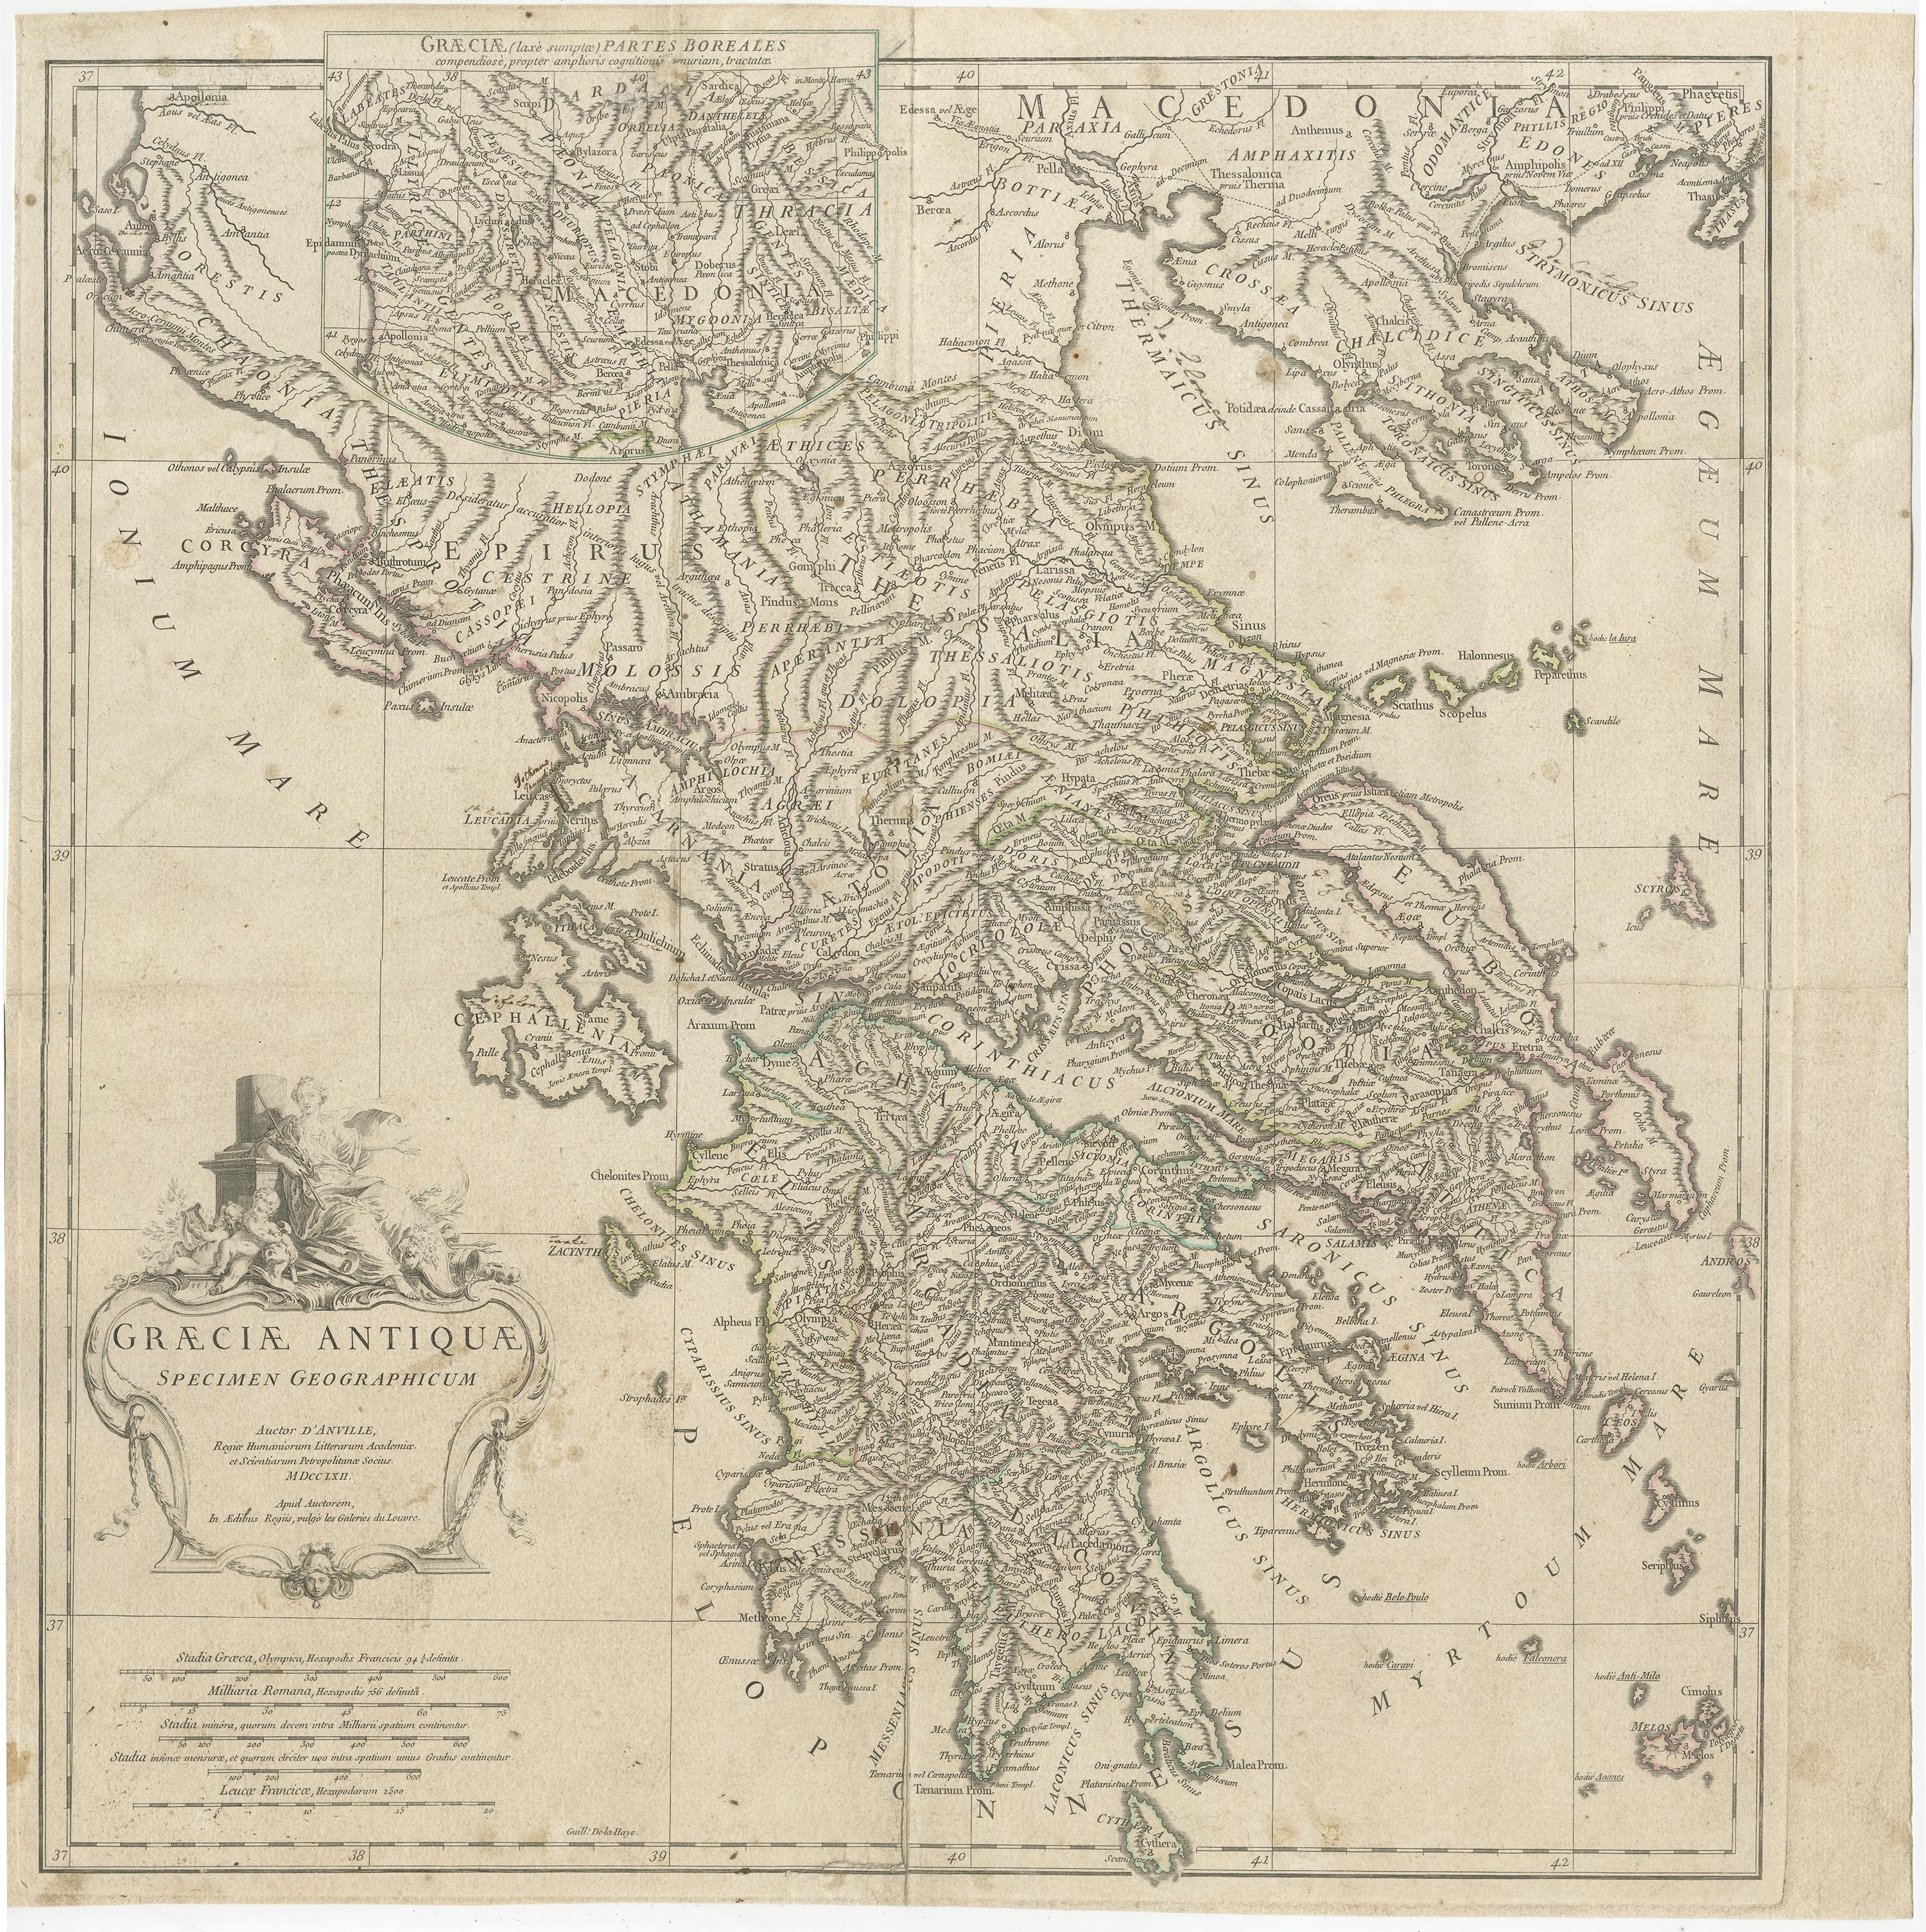 Antique map titled 'Graeciae Antiquae'. 

Large scale map of Greece, extends south to the island of Cythera. Inset map shows details of Macedonia. Published circa 1786. 

Artists and Engravers: Jean-Baptiste Bourguignon d'Anville, French